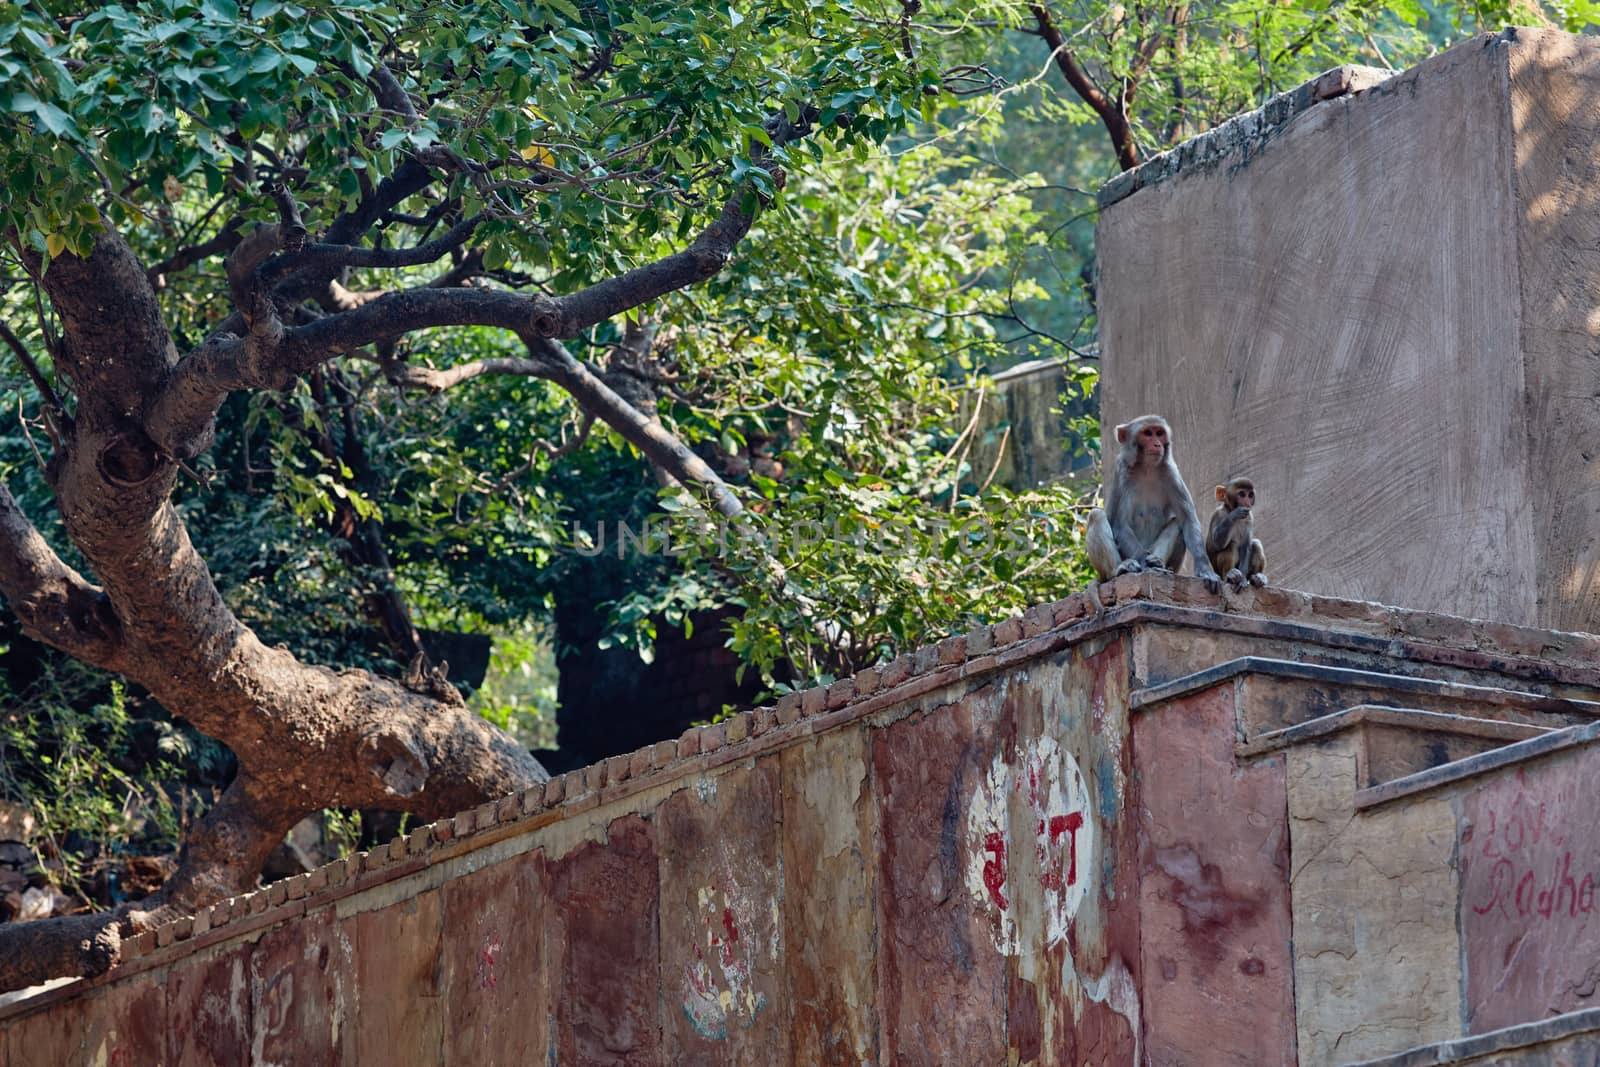 Macaque sitting near stairs in India with forest view behind by rasika108